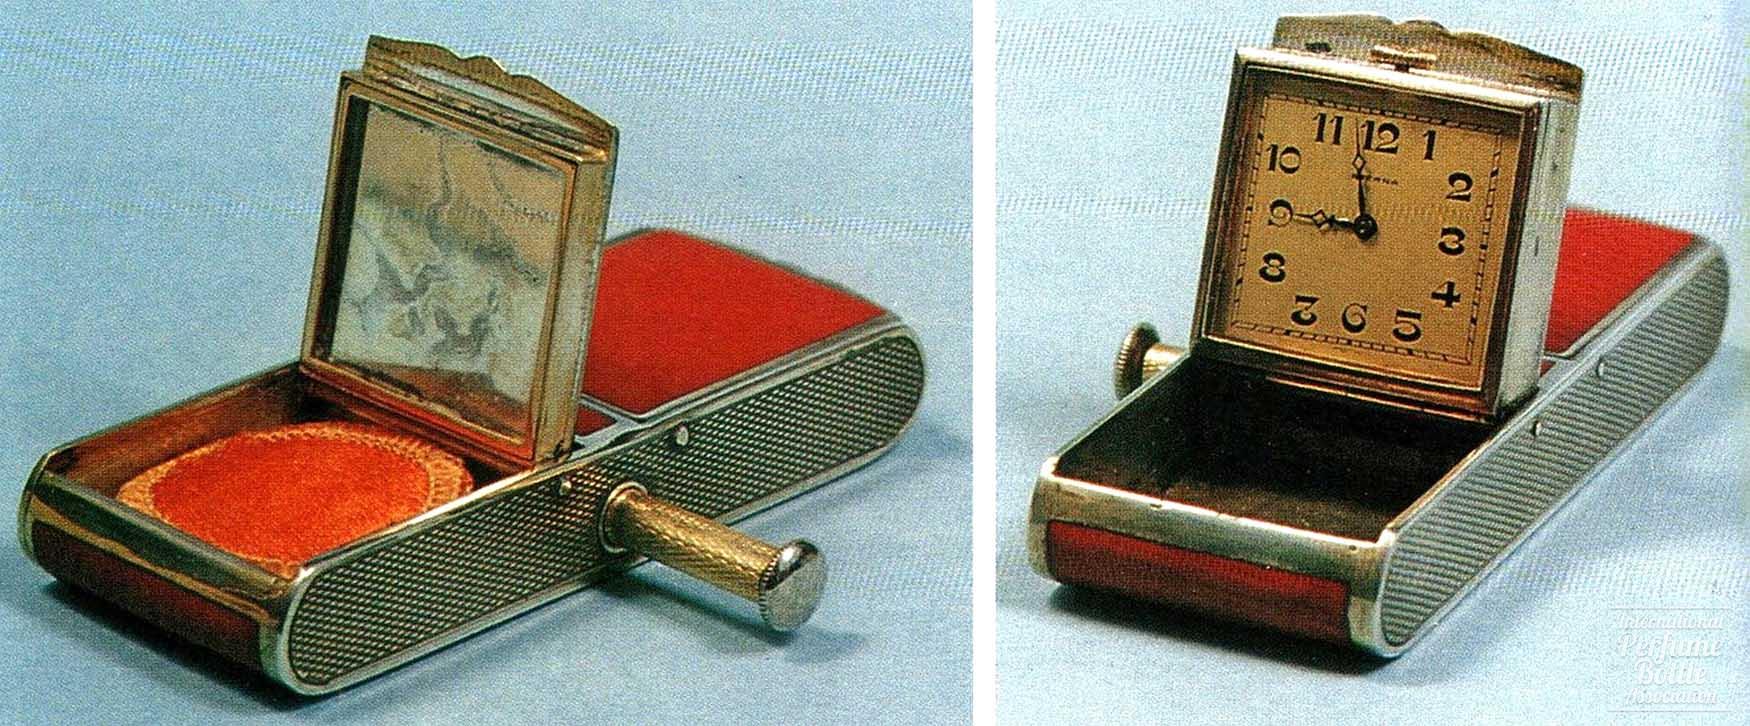 Red Enamel Compact and Lipstick with Clock